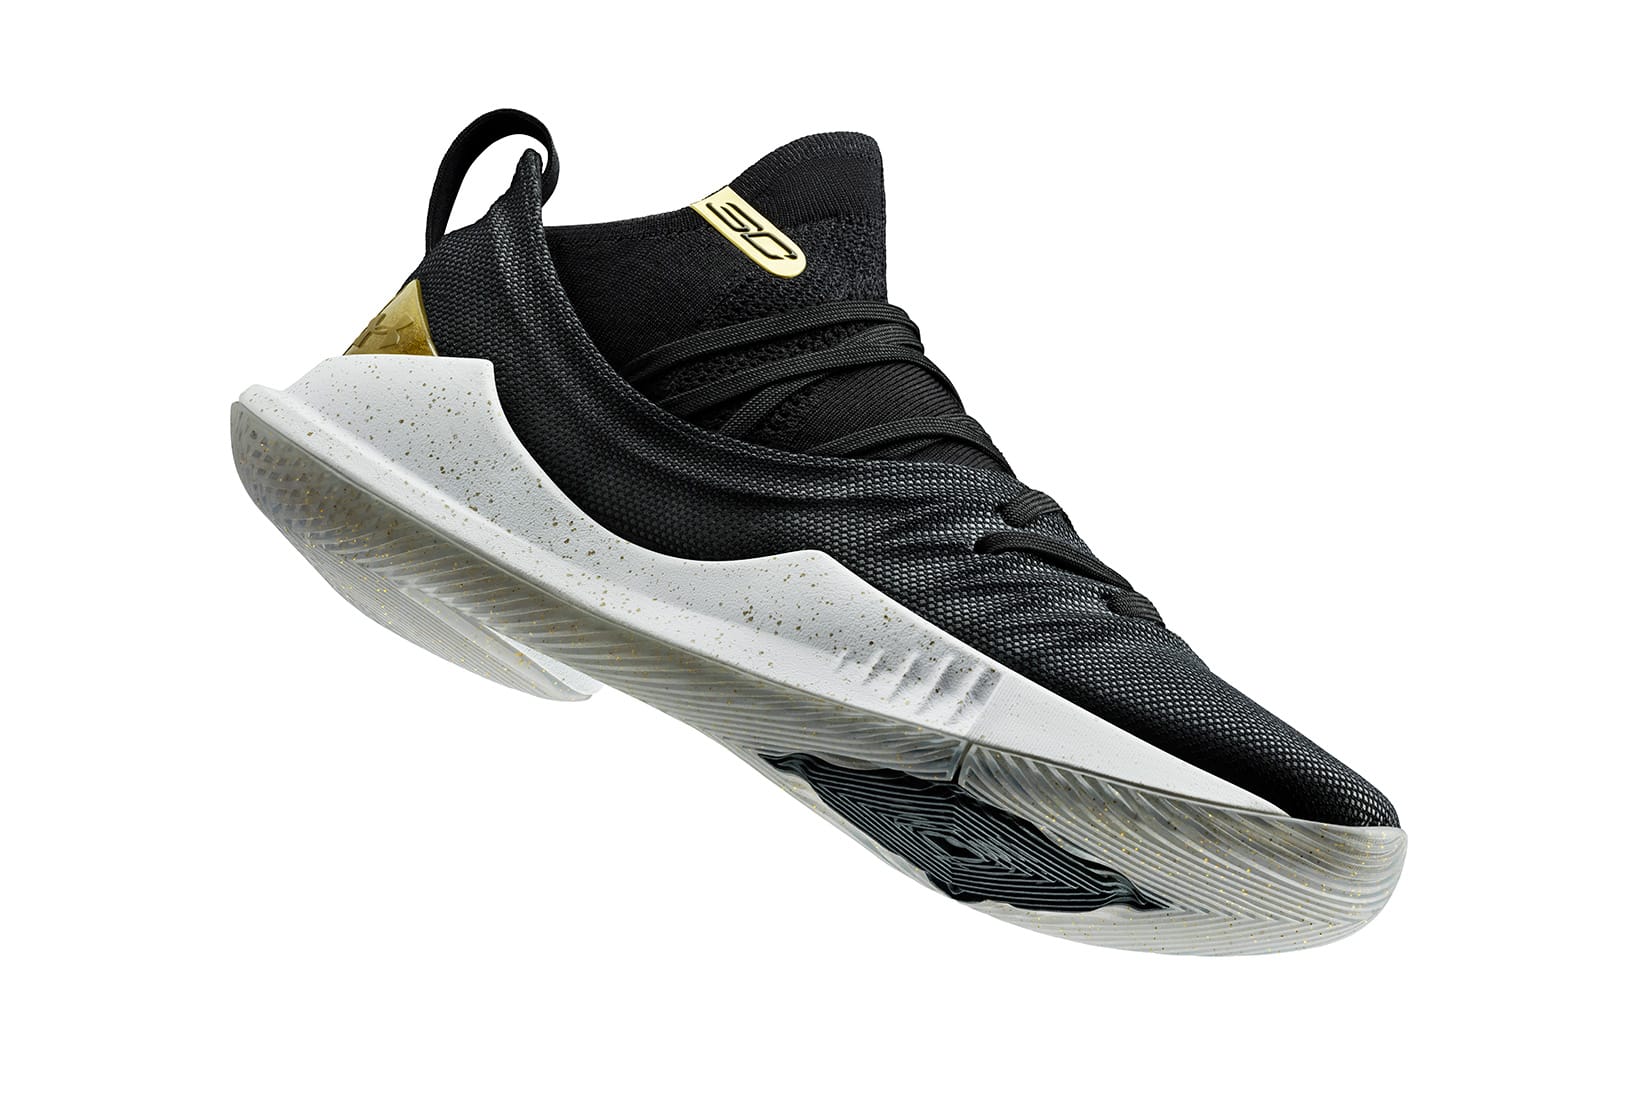 curry 5 gold and white